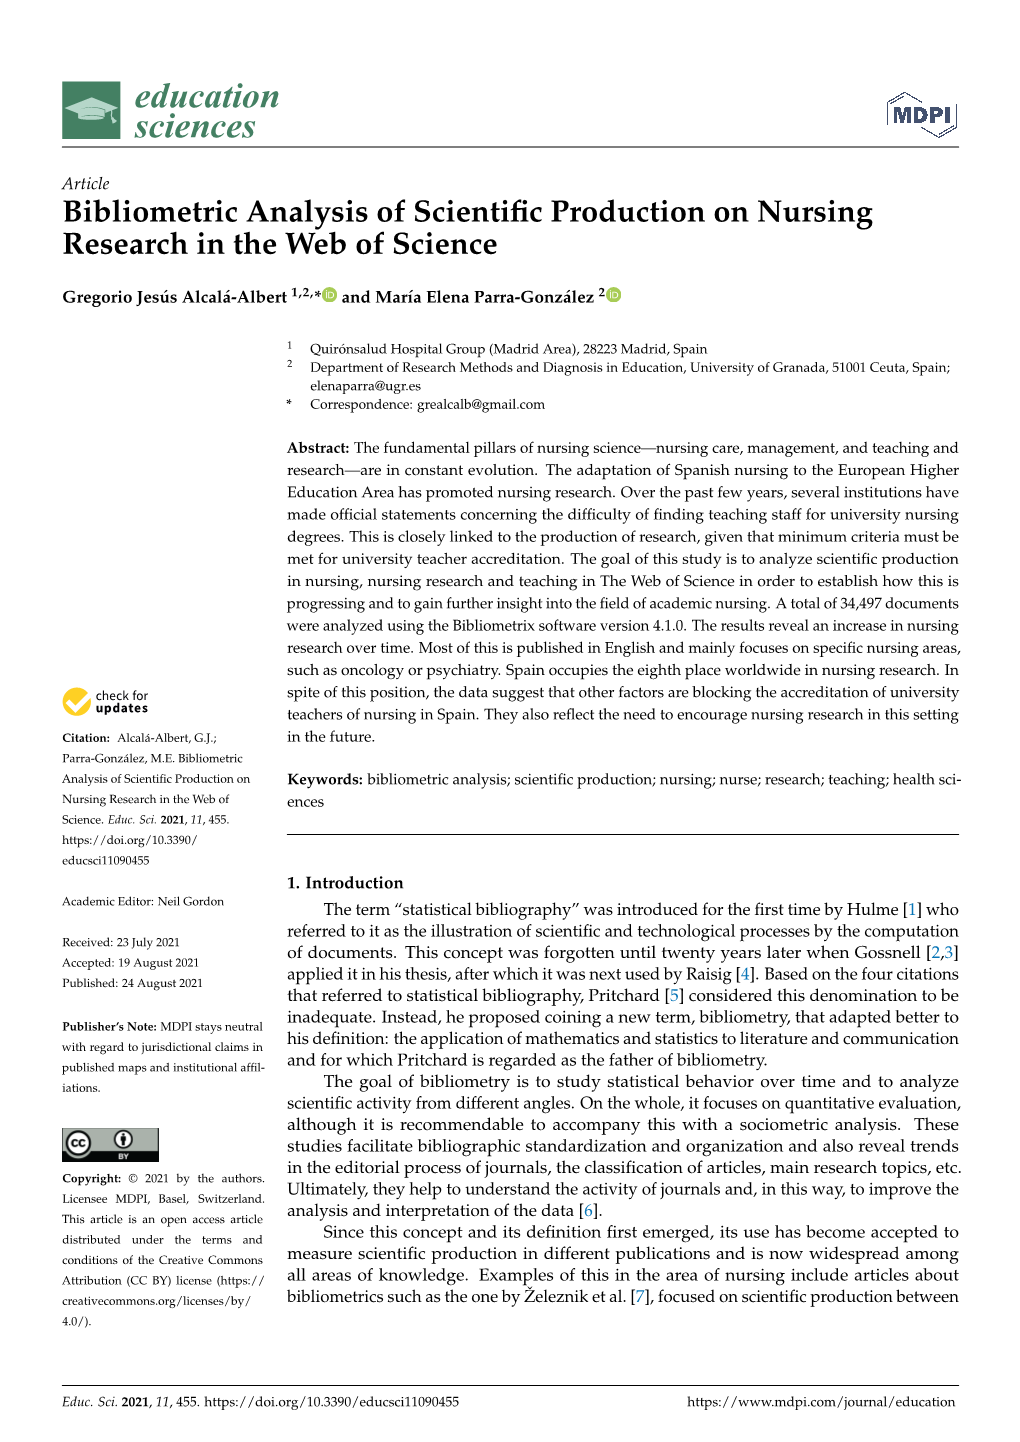 Bibliometric Analysis of Scientific Production on Nursing Research In